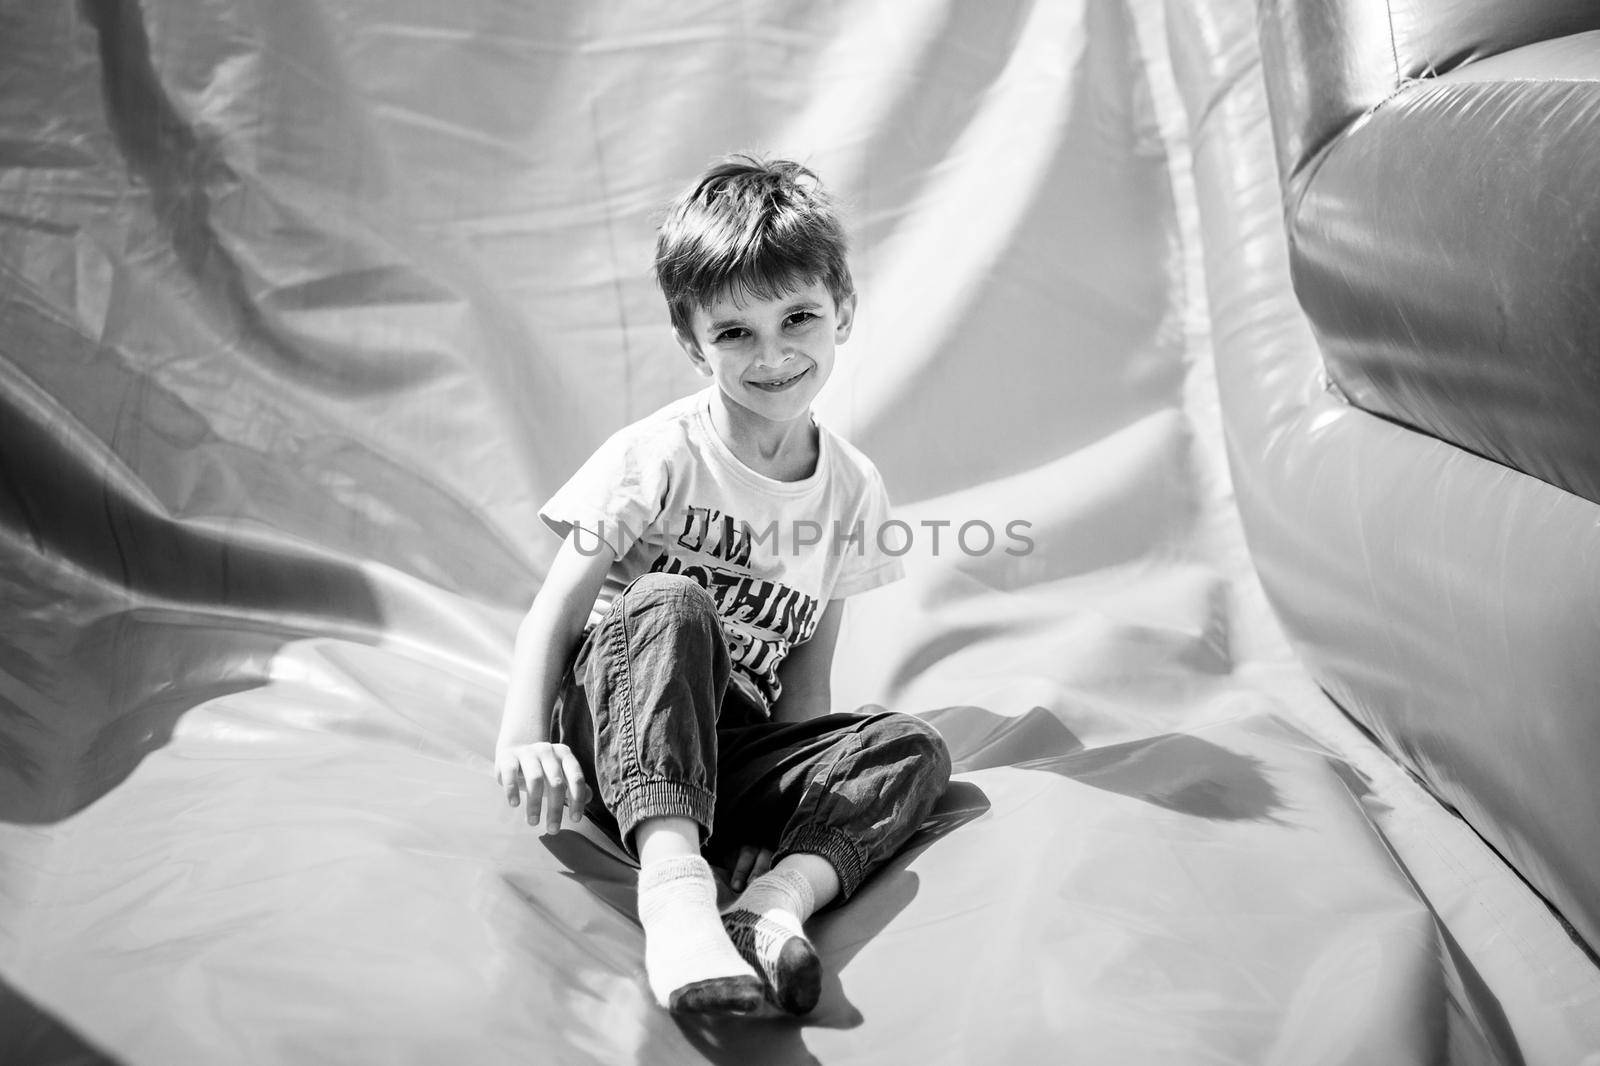 Smiling little boy playing on inflatable slide, looking at camera, black and white shot